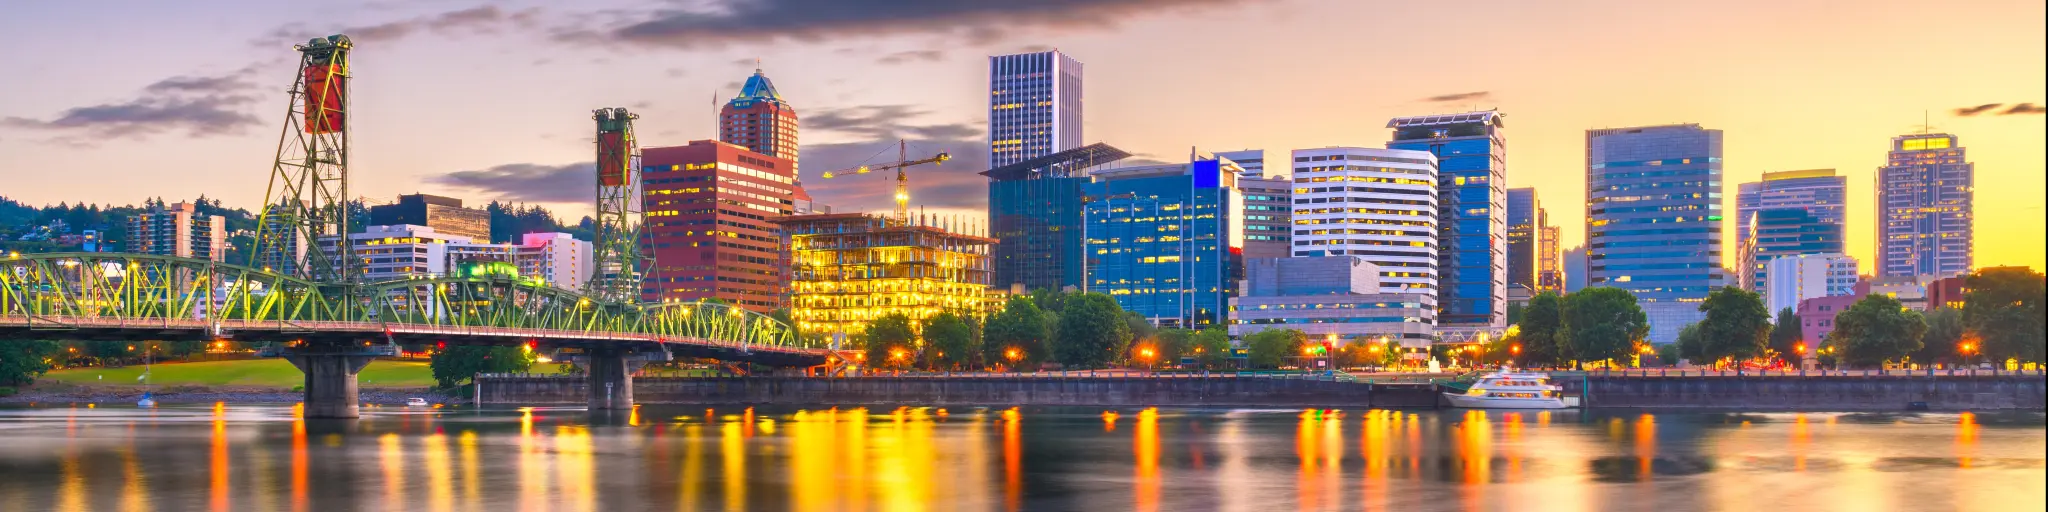 Portland, Oregon, USA with the skyline at dusk on the Willamette River, lights reflecting in the water and the bridge to the left of the photo.